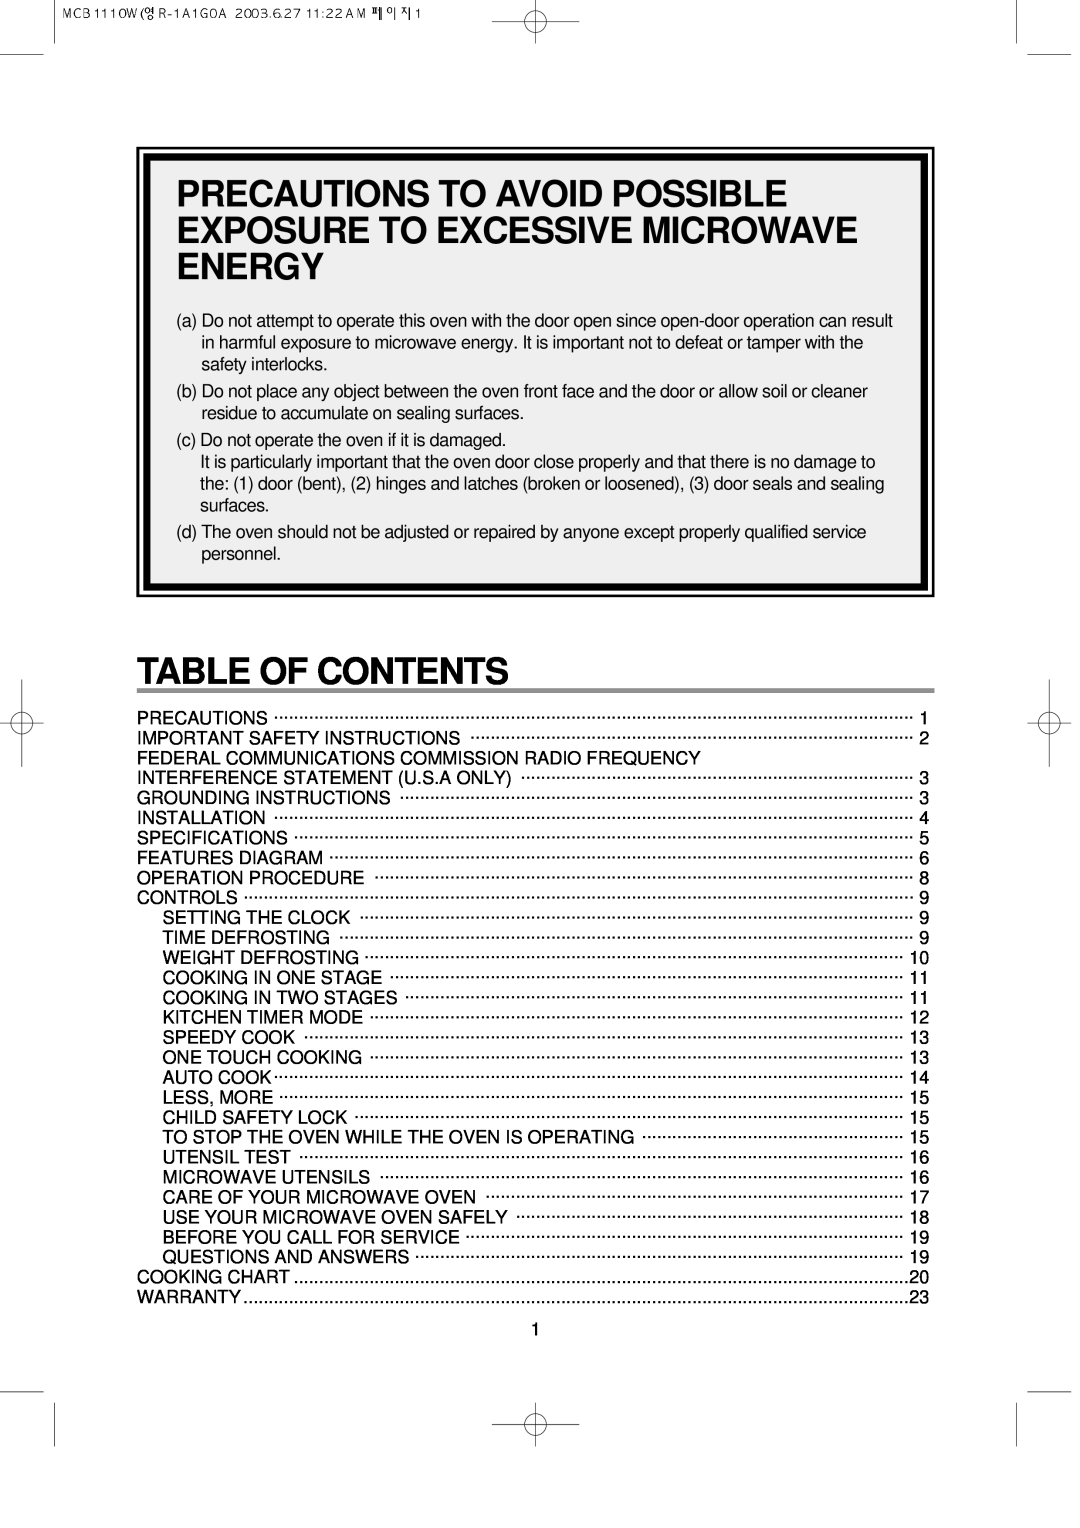 Magic Chef MCB1110W instruction manual Table Of Contents 